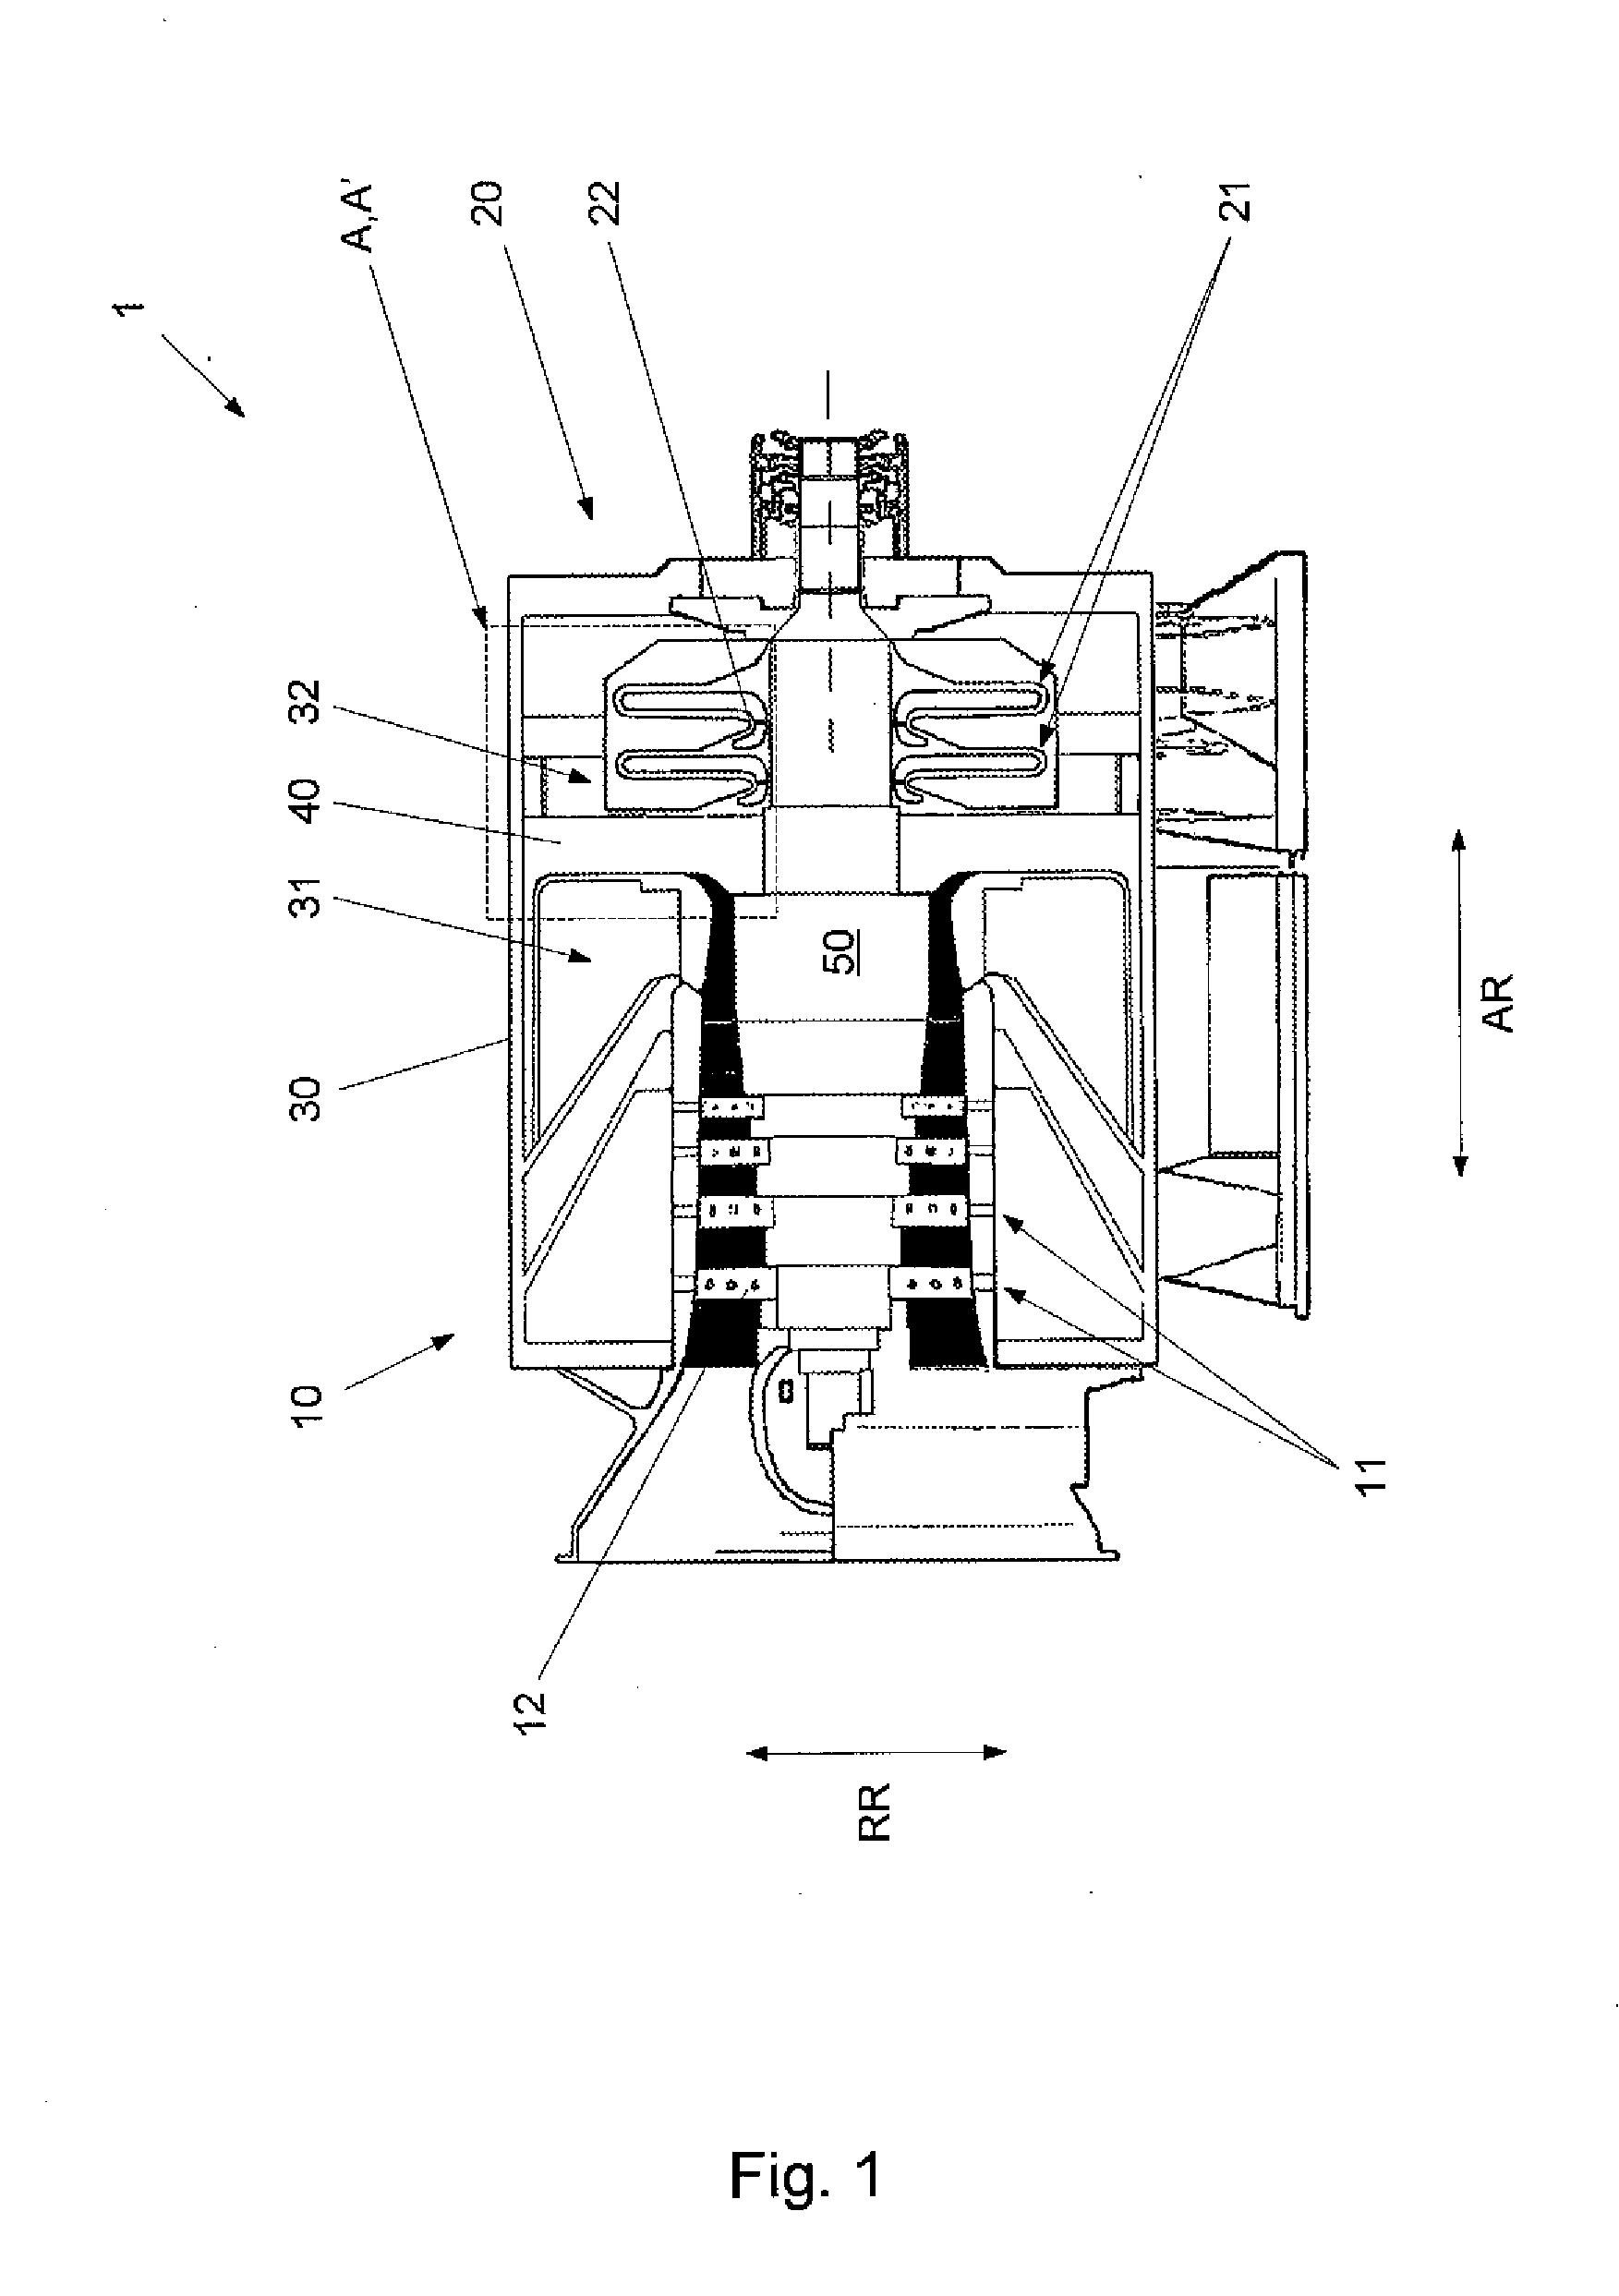 Axial-radial turbomachine